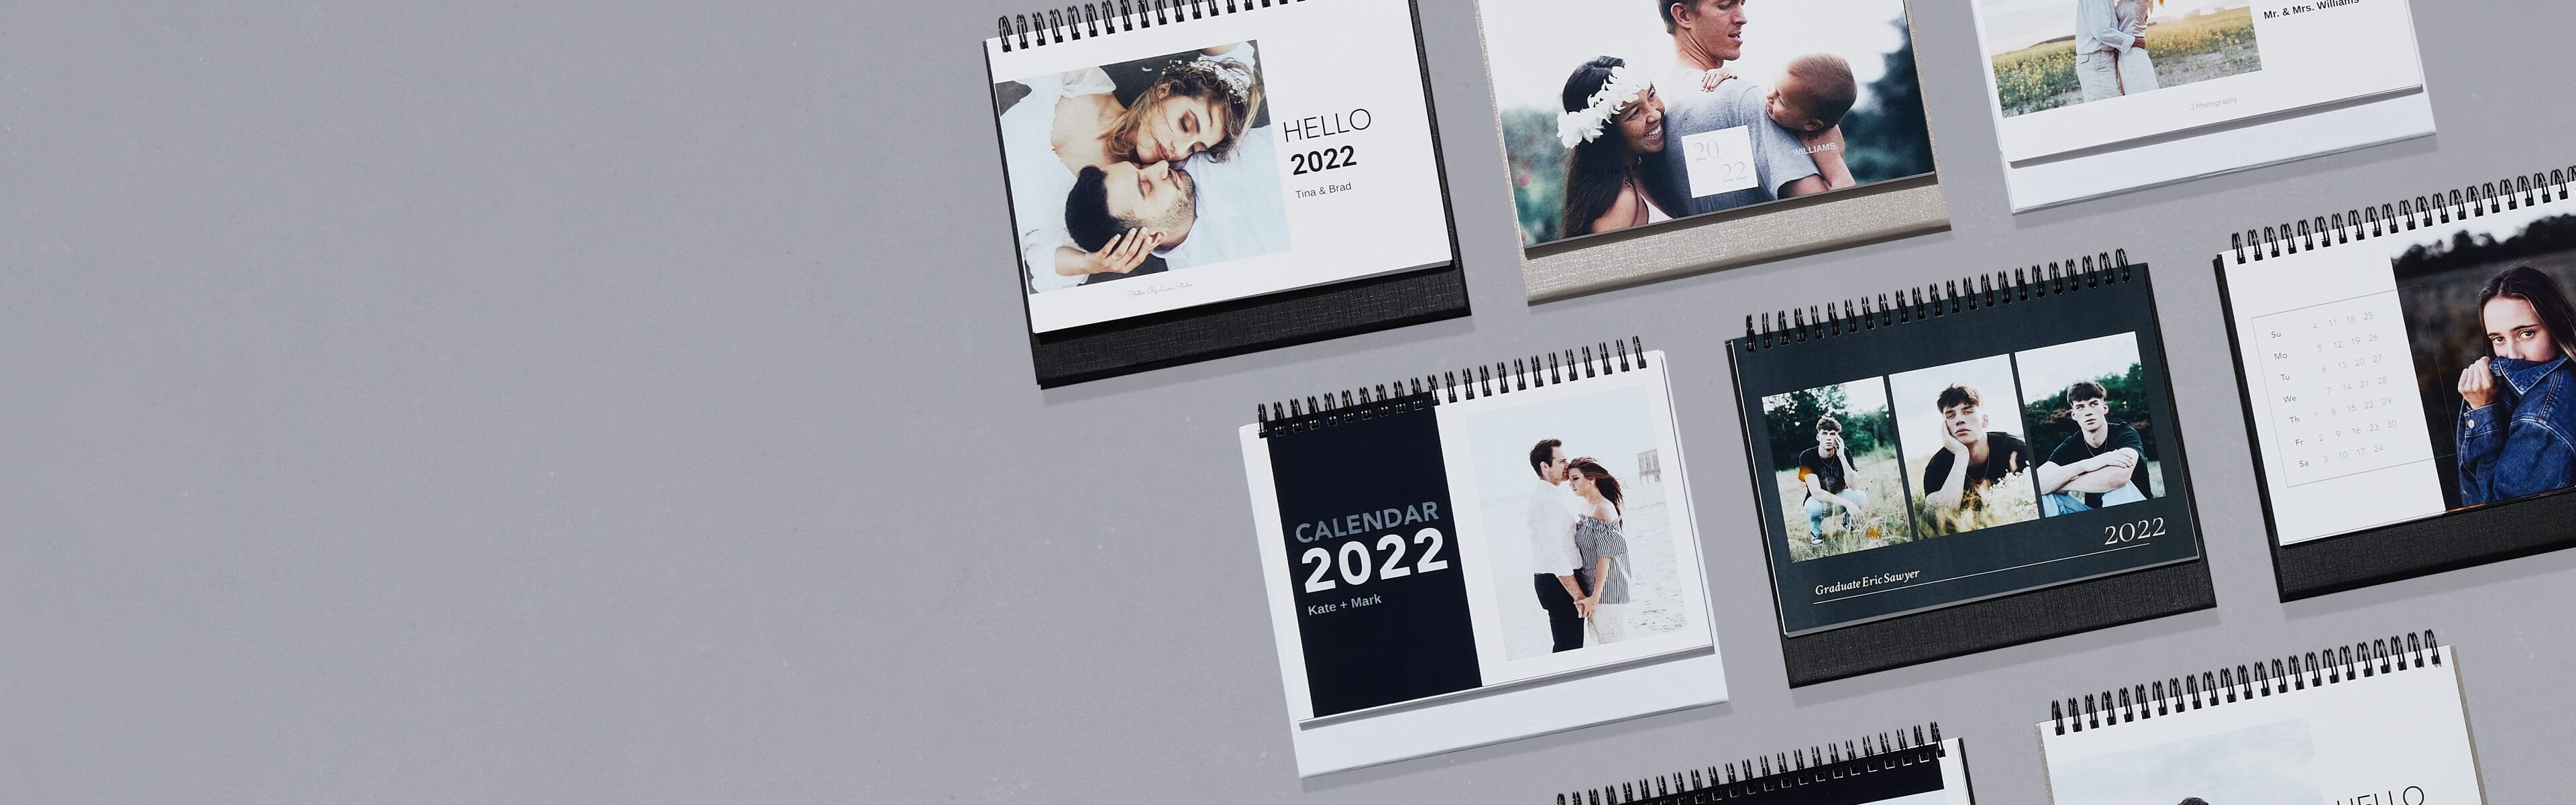 eight desk calendars on a grey table showing different designs